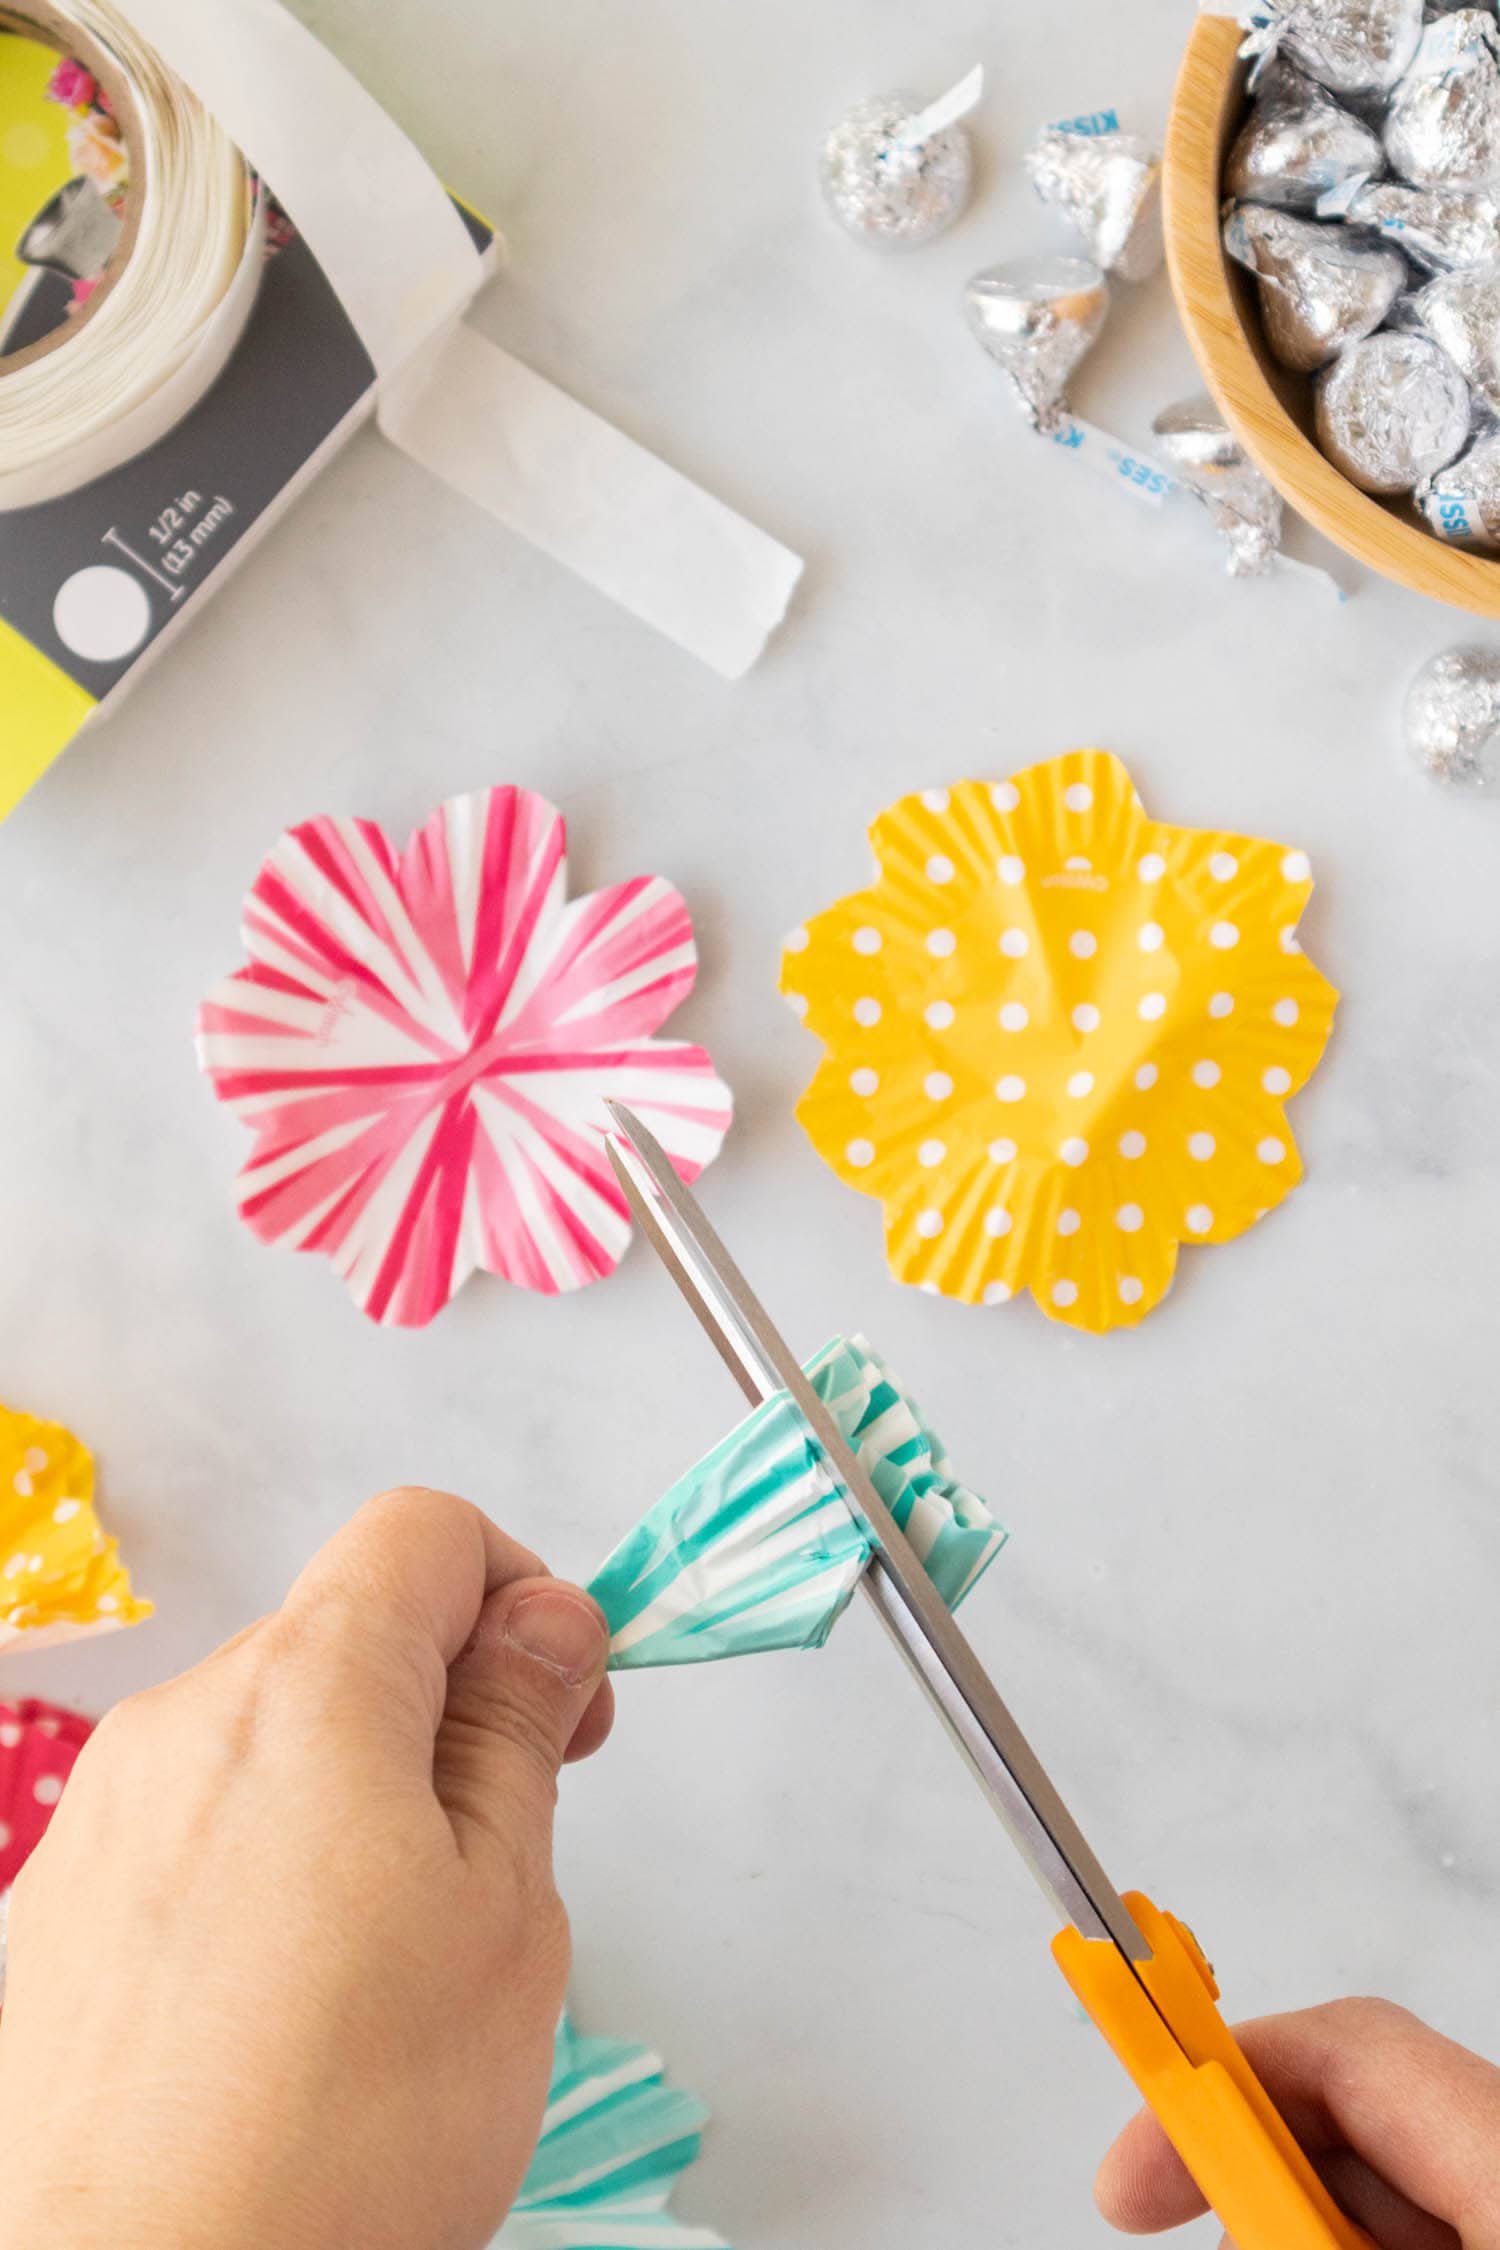 Take 5 of the Same Cupcake Liners and Fold into Quarters and Shape them into Petals.